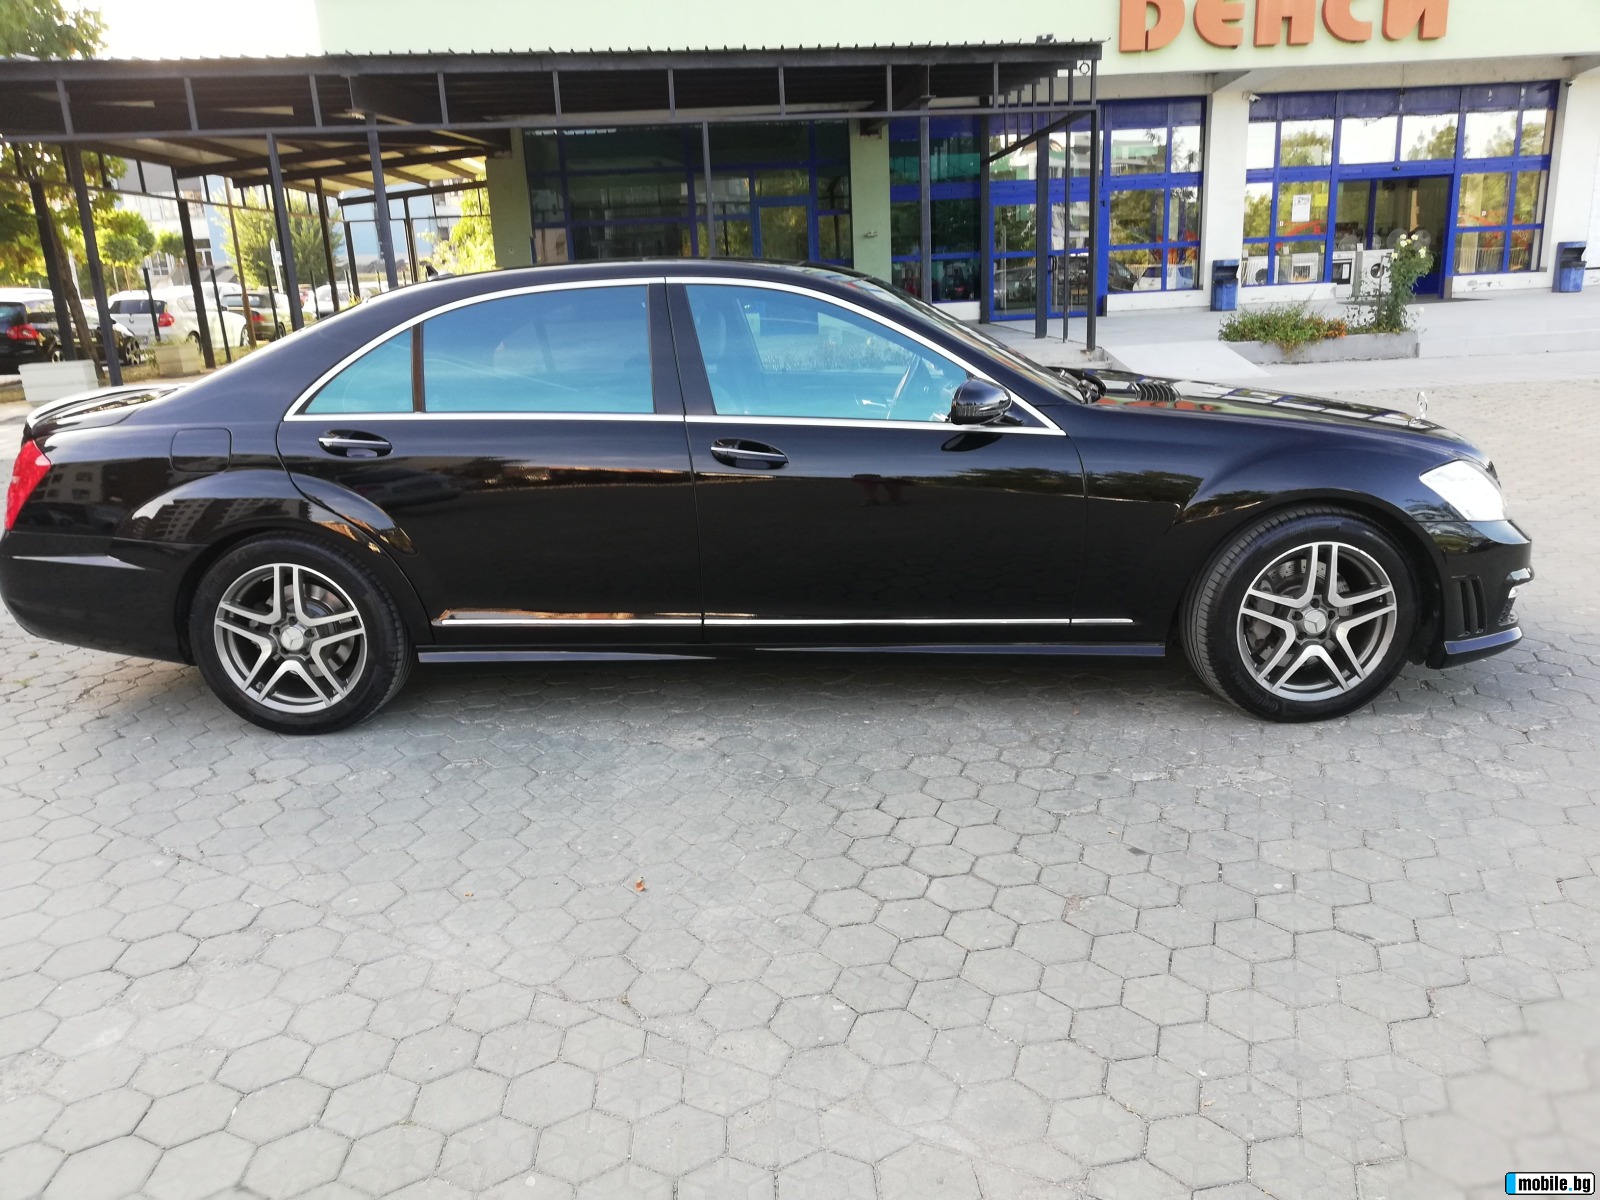 Mercedes-Benz S 500 S 550 Long 4matic FACE S63 AMG | Mobile.bg   2